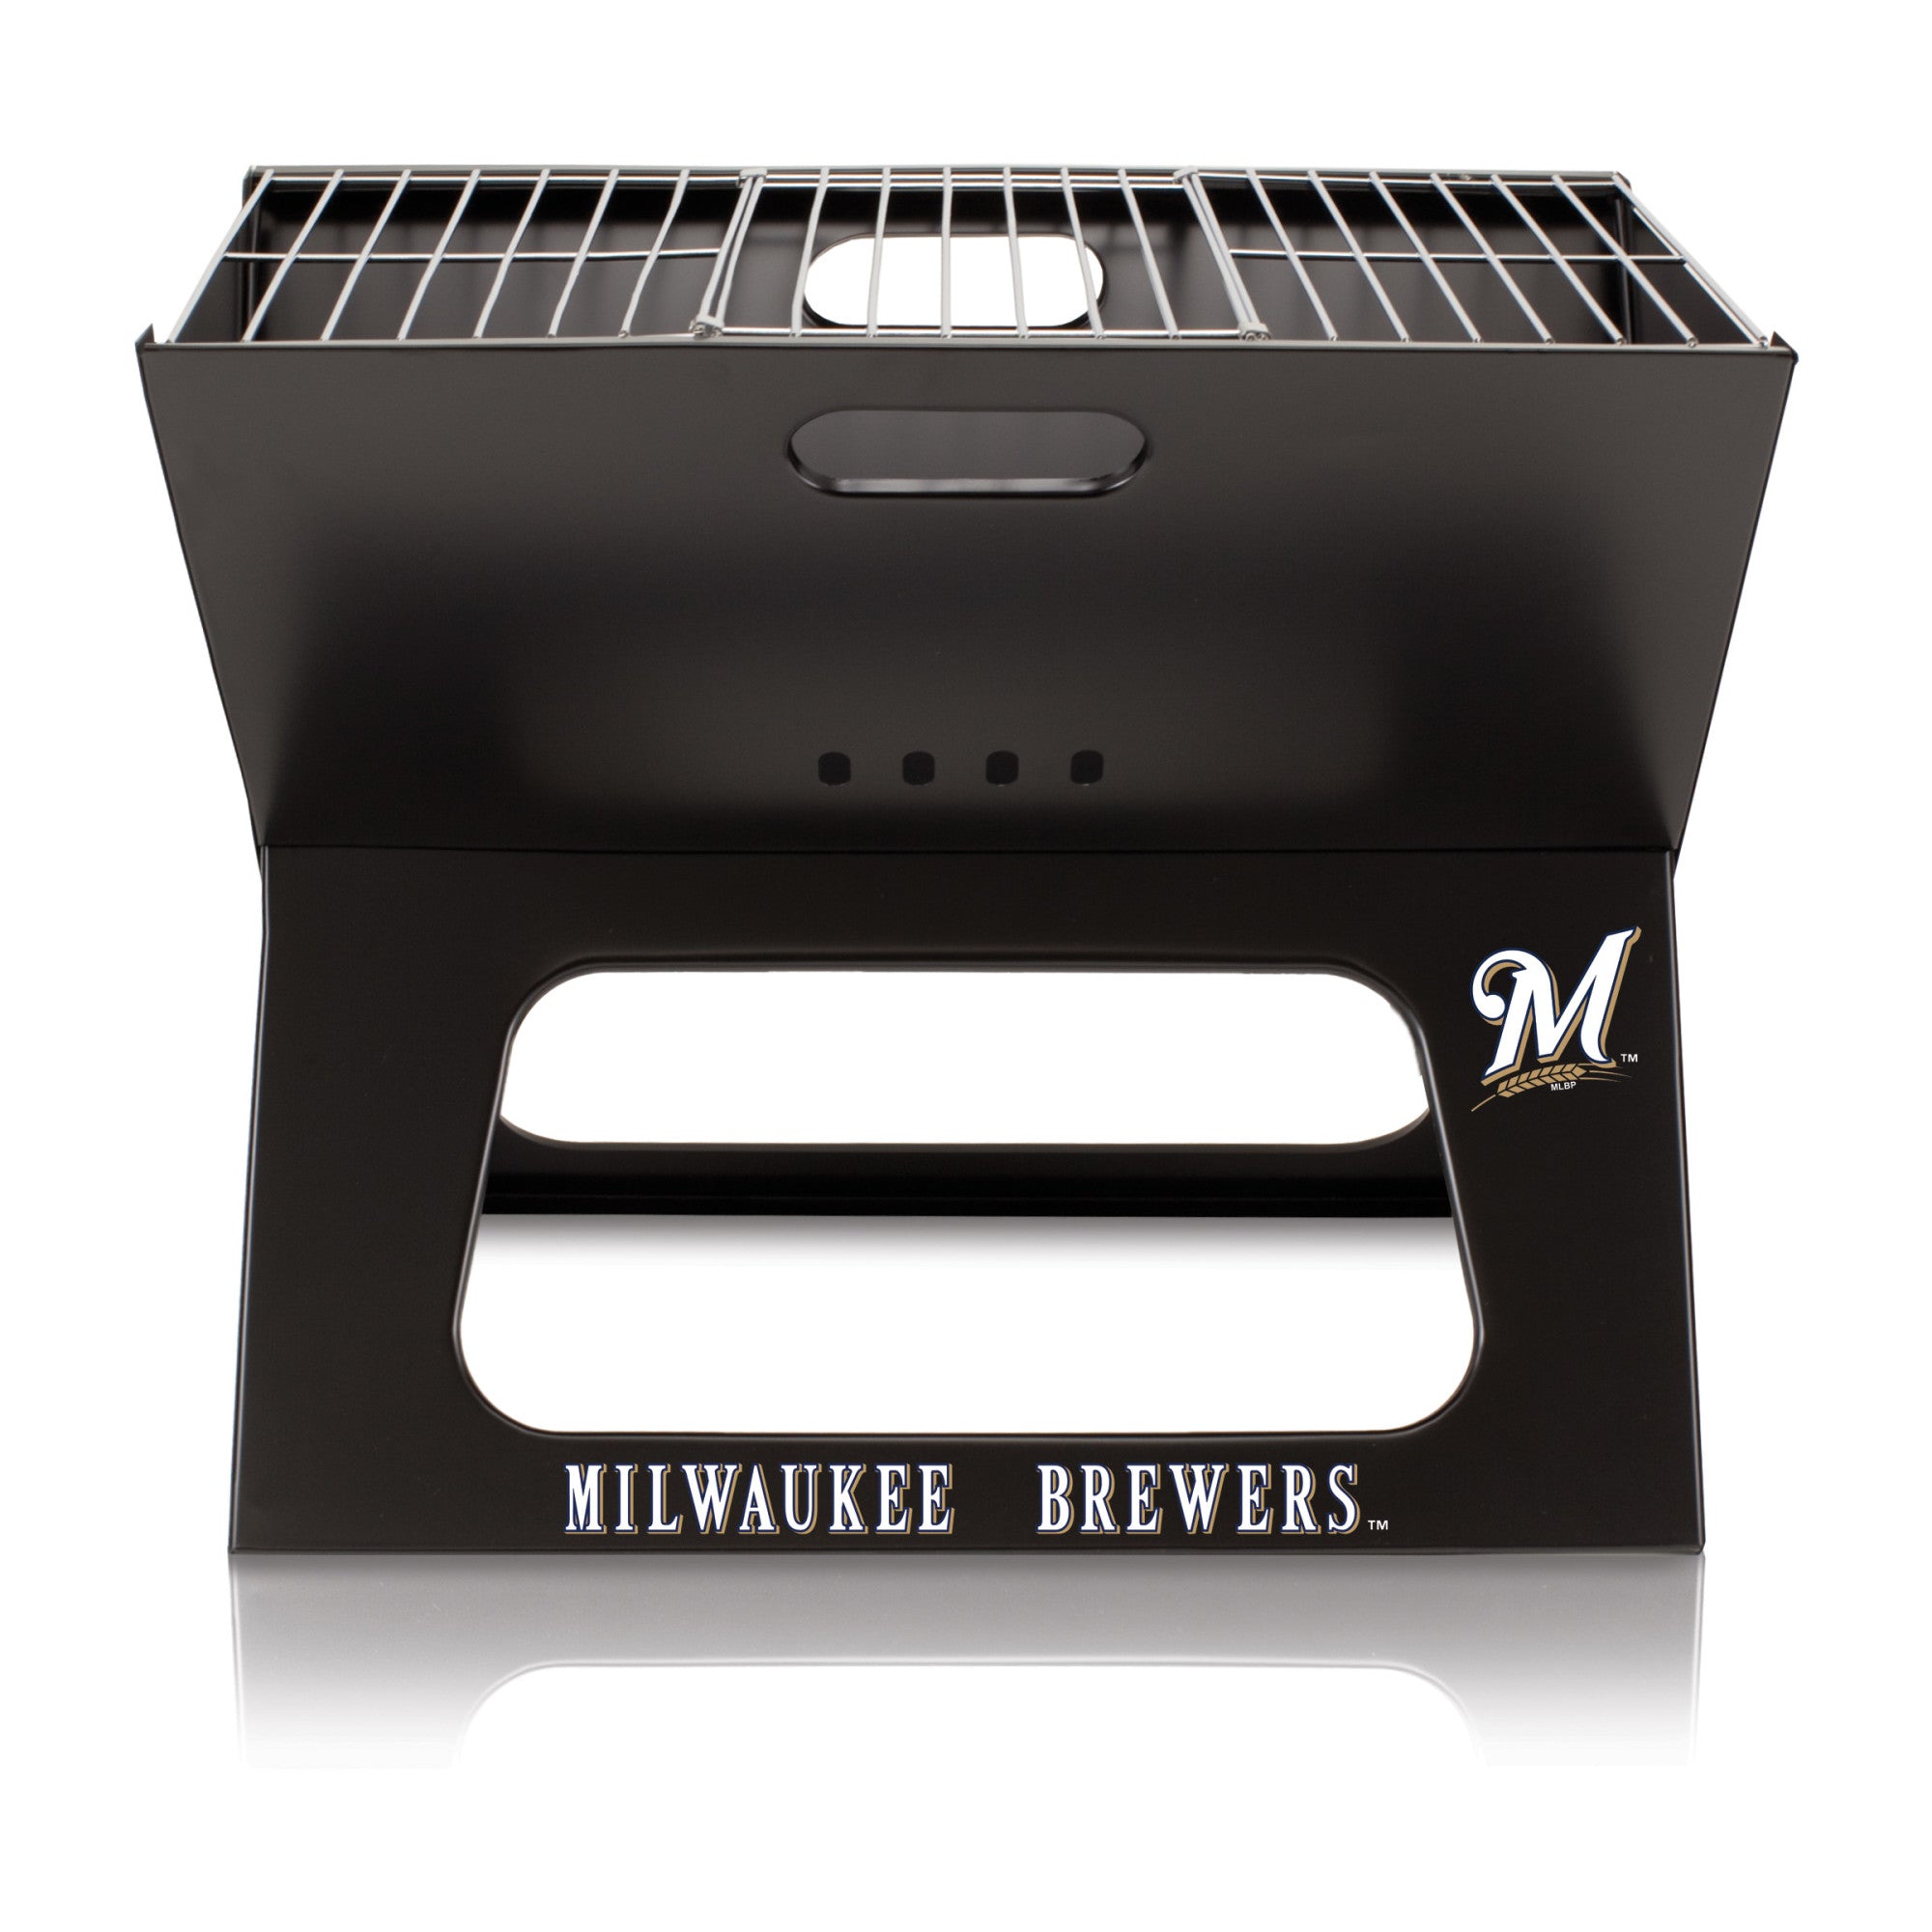 Milwaukee Brewers - X-Grill Portable Charcoal BBQ Grill